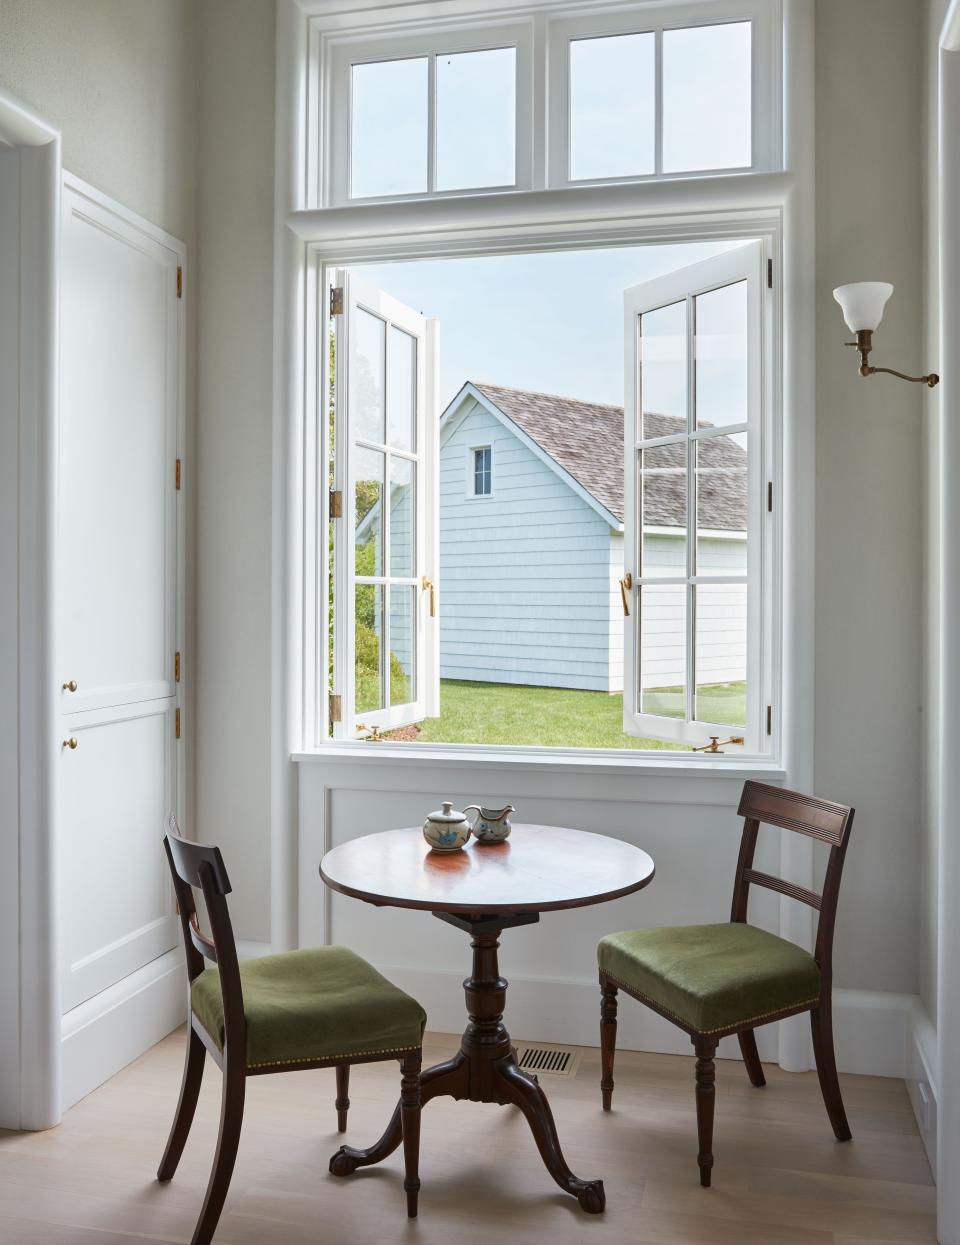 A pair of velvet-upholstered regency chairs and a Queen Anne table stand at the kitchen window.